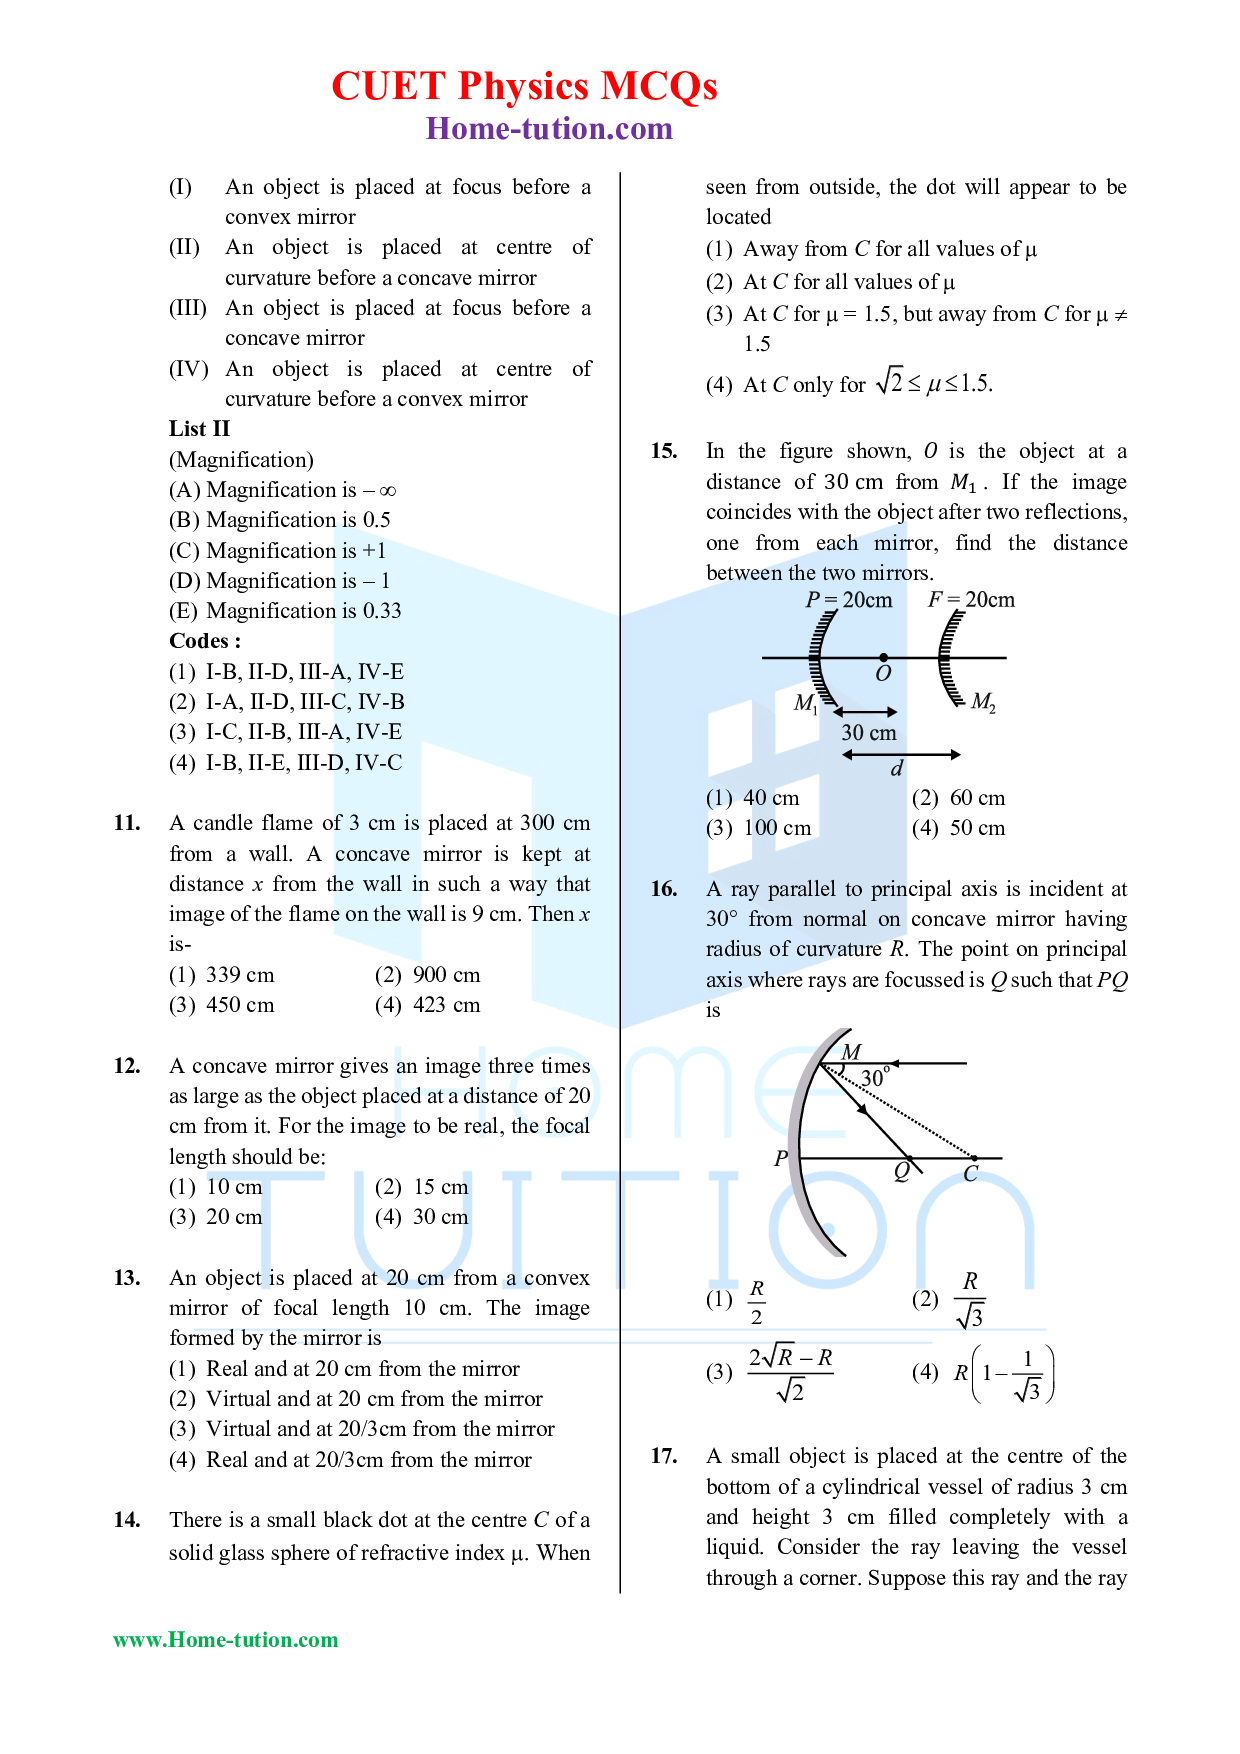 CUET MCQ Questions For Physics Chapter-09 Ray Optics